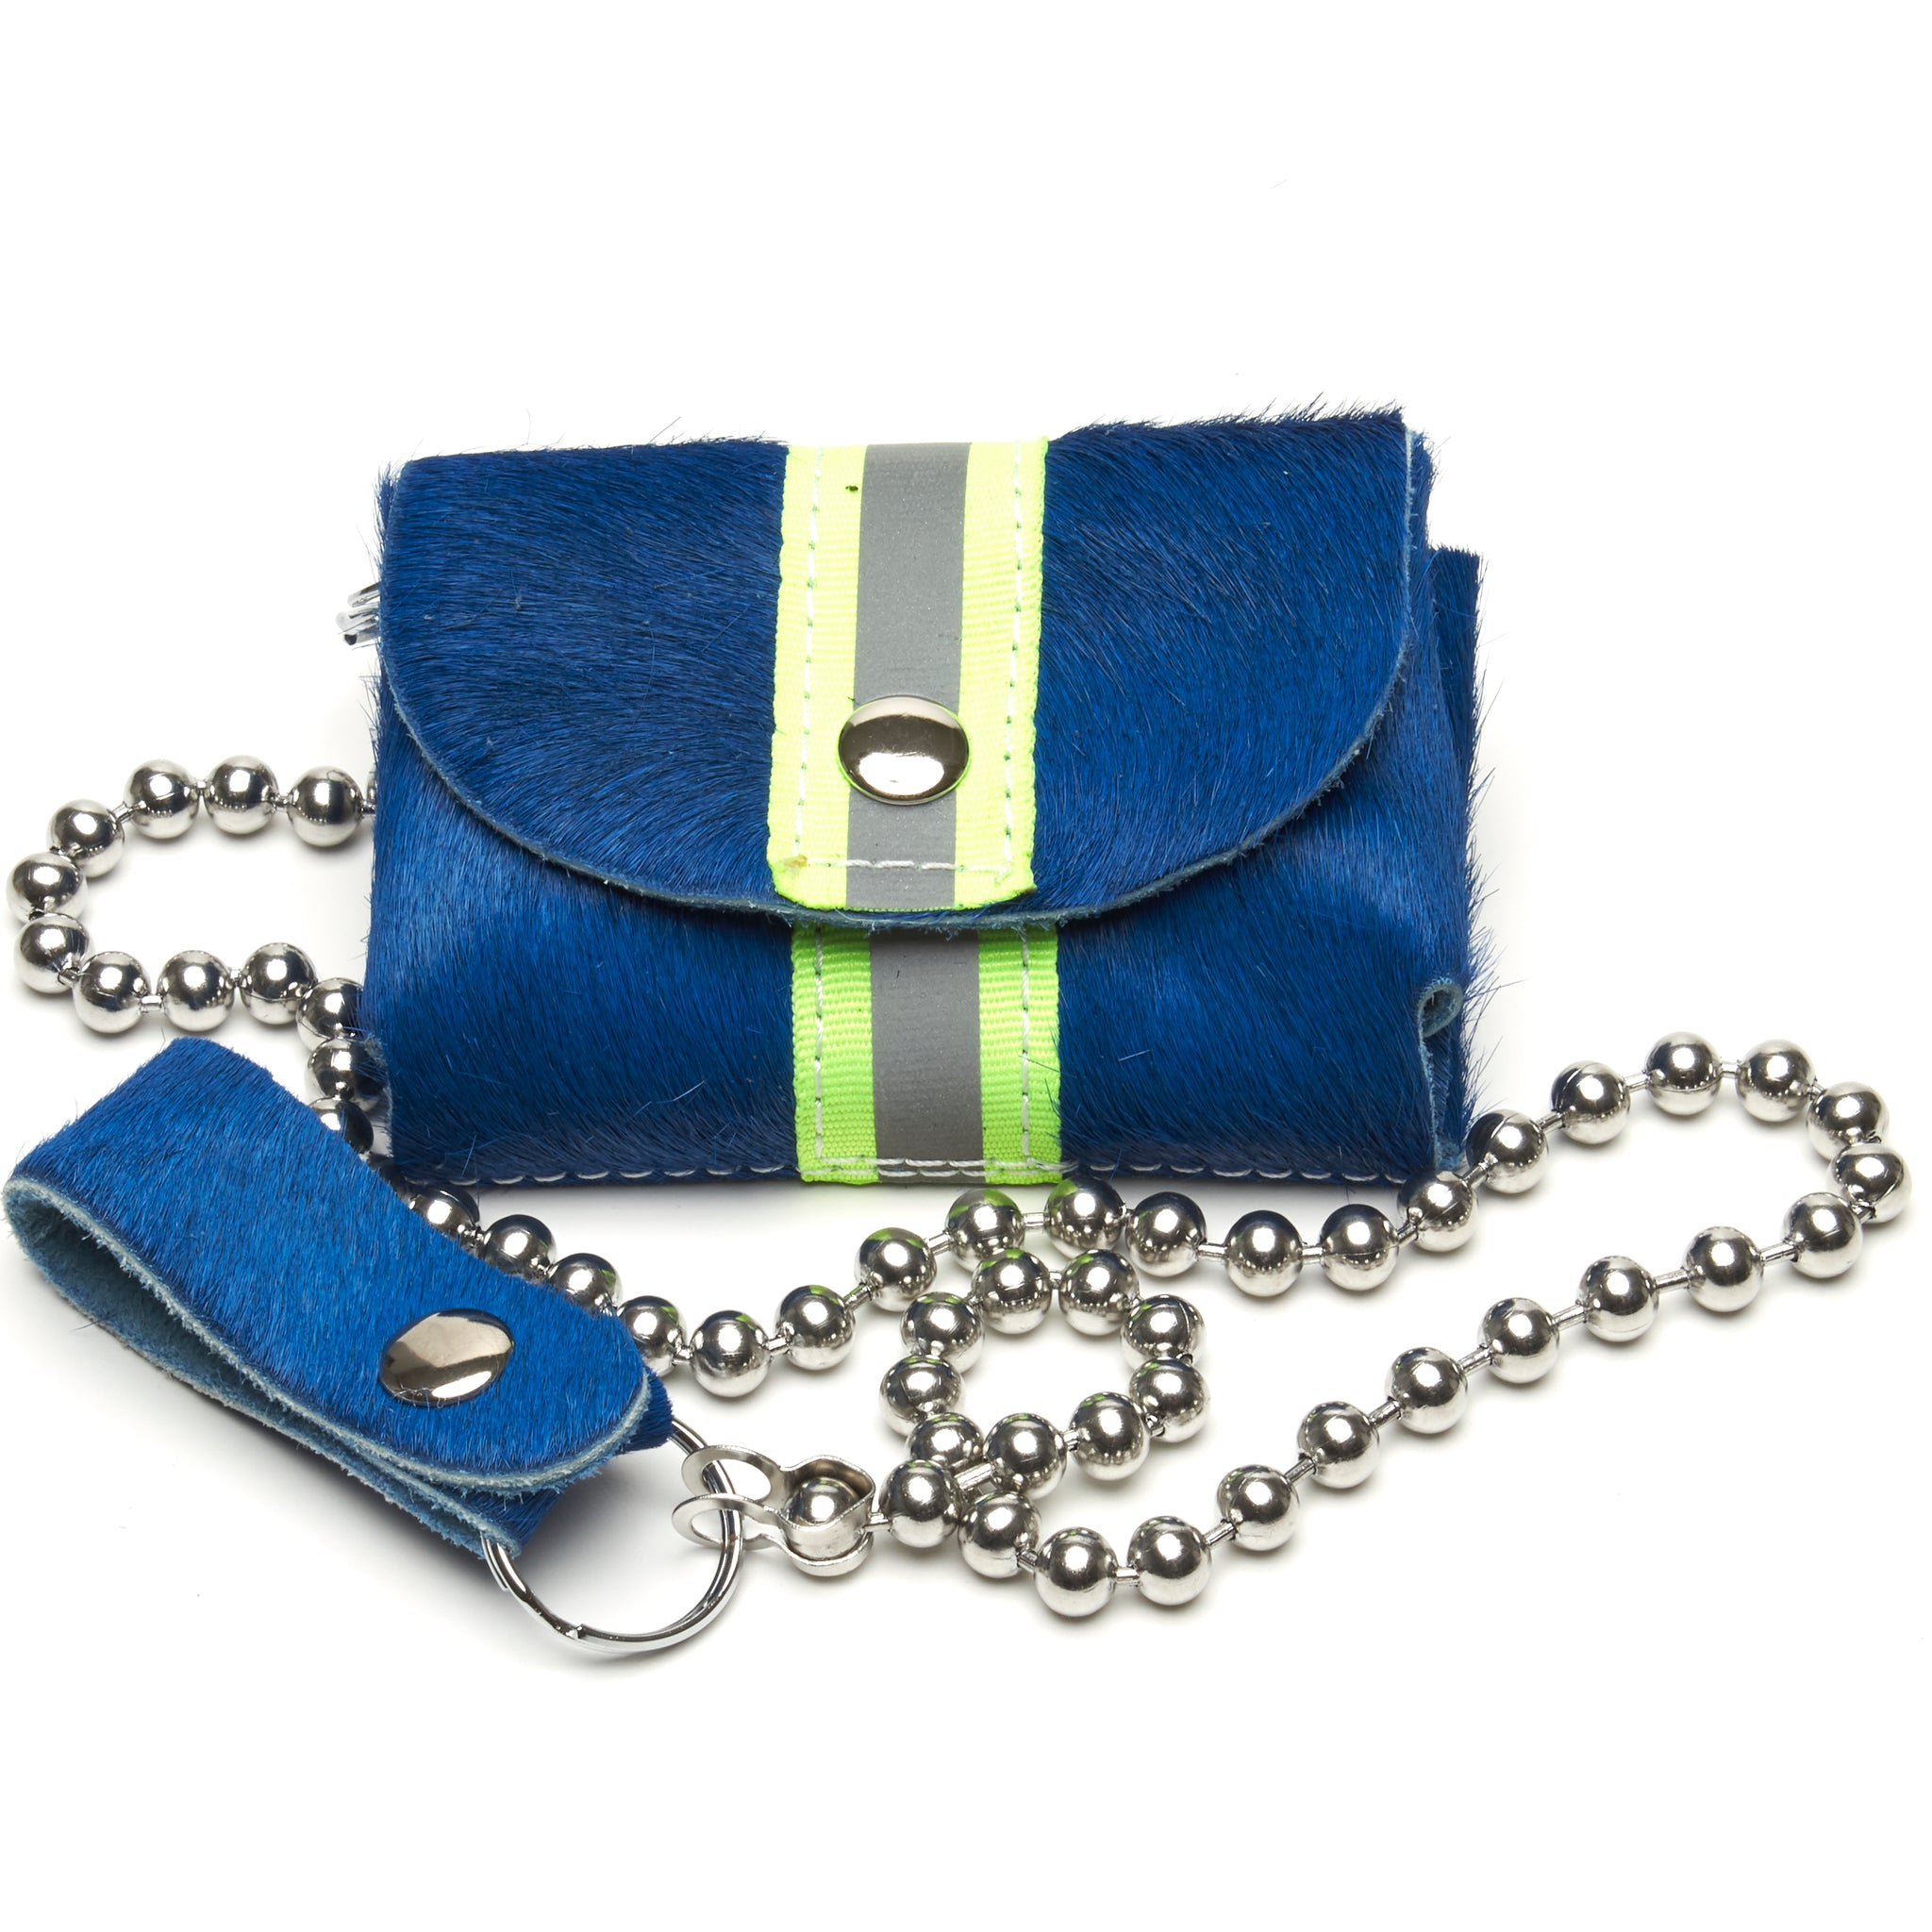 The Essentials wallet cobalt blue hair-on cowhide with neon yellow reflective band